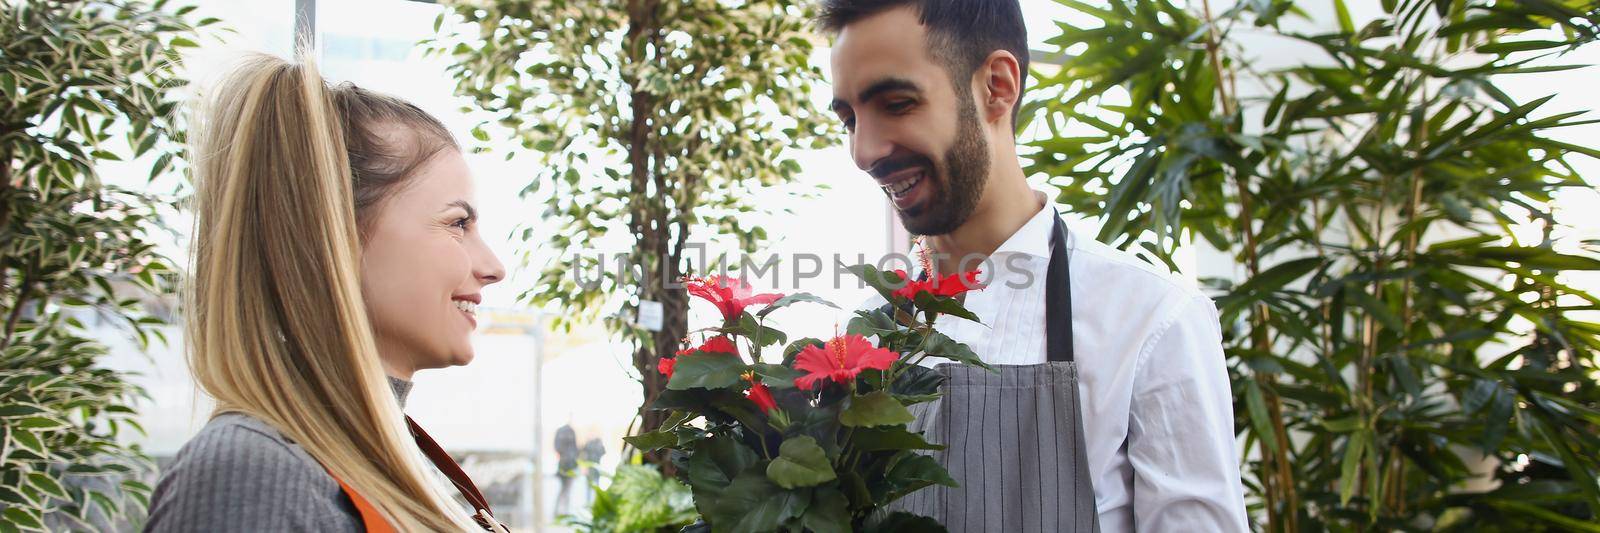 Man consultant gives flowers in pot to his colleague, show liking for her by kuprevich